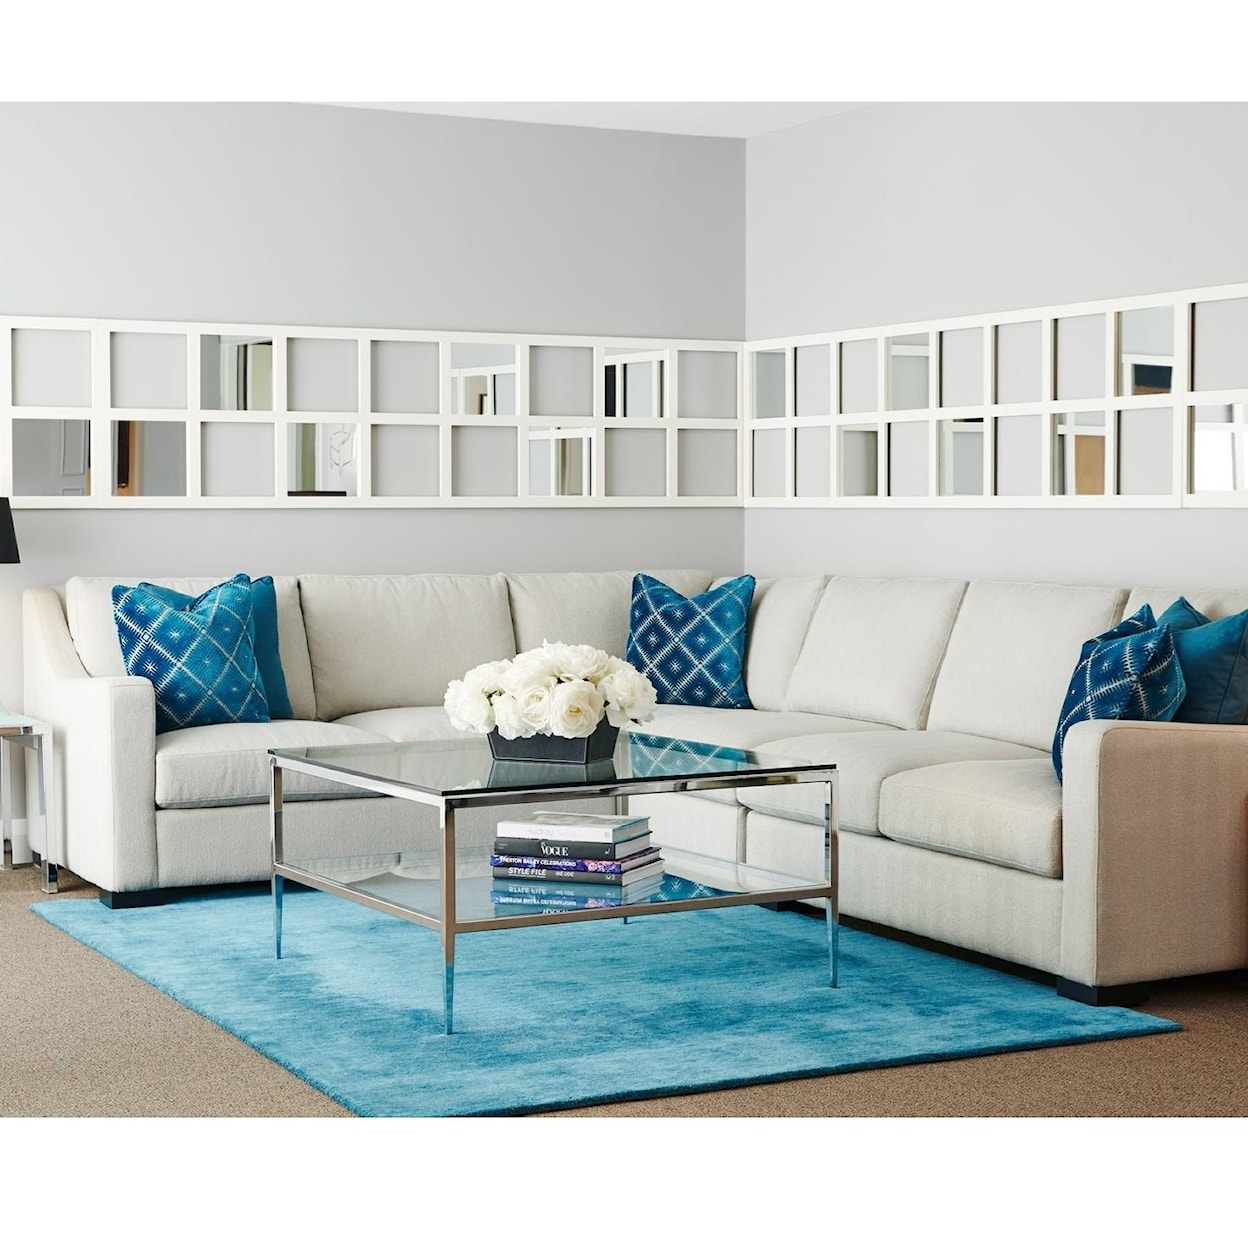 Brentwood Classics Monty Sectional